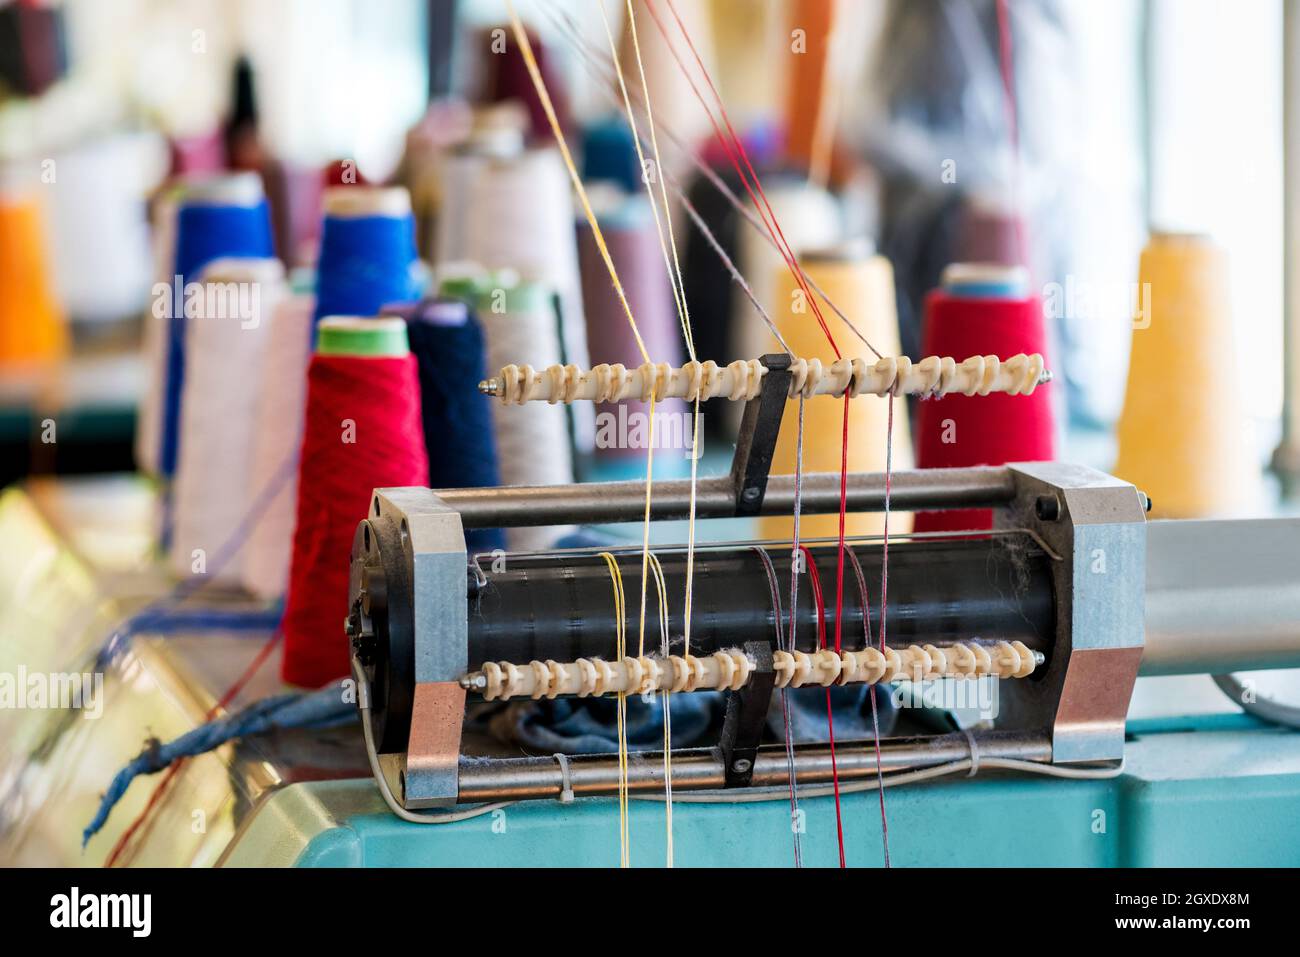 Yarn feeder with threaded wool of assorted colors on knitting machine at a knitwear factory in close up detail Stock Photo